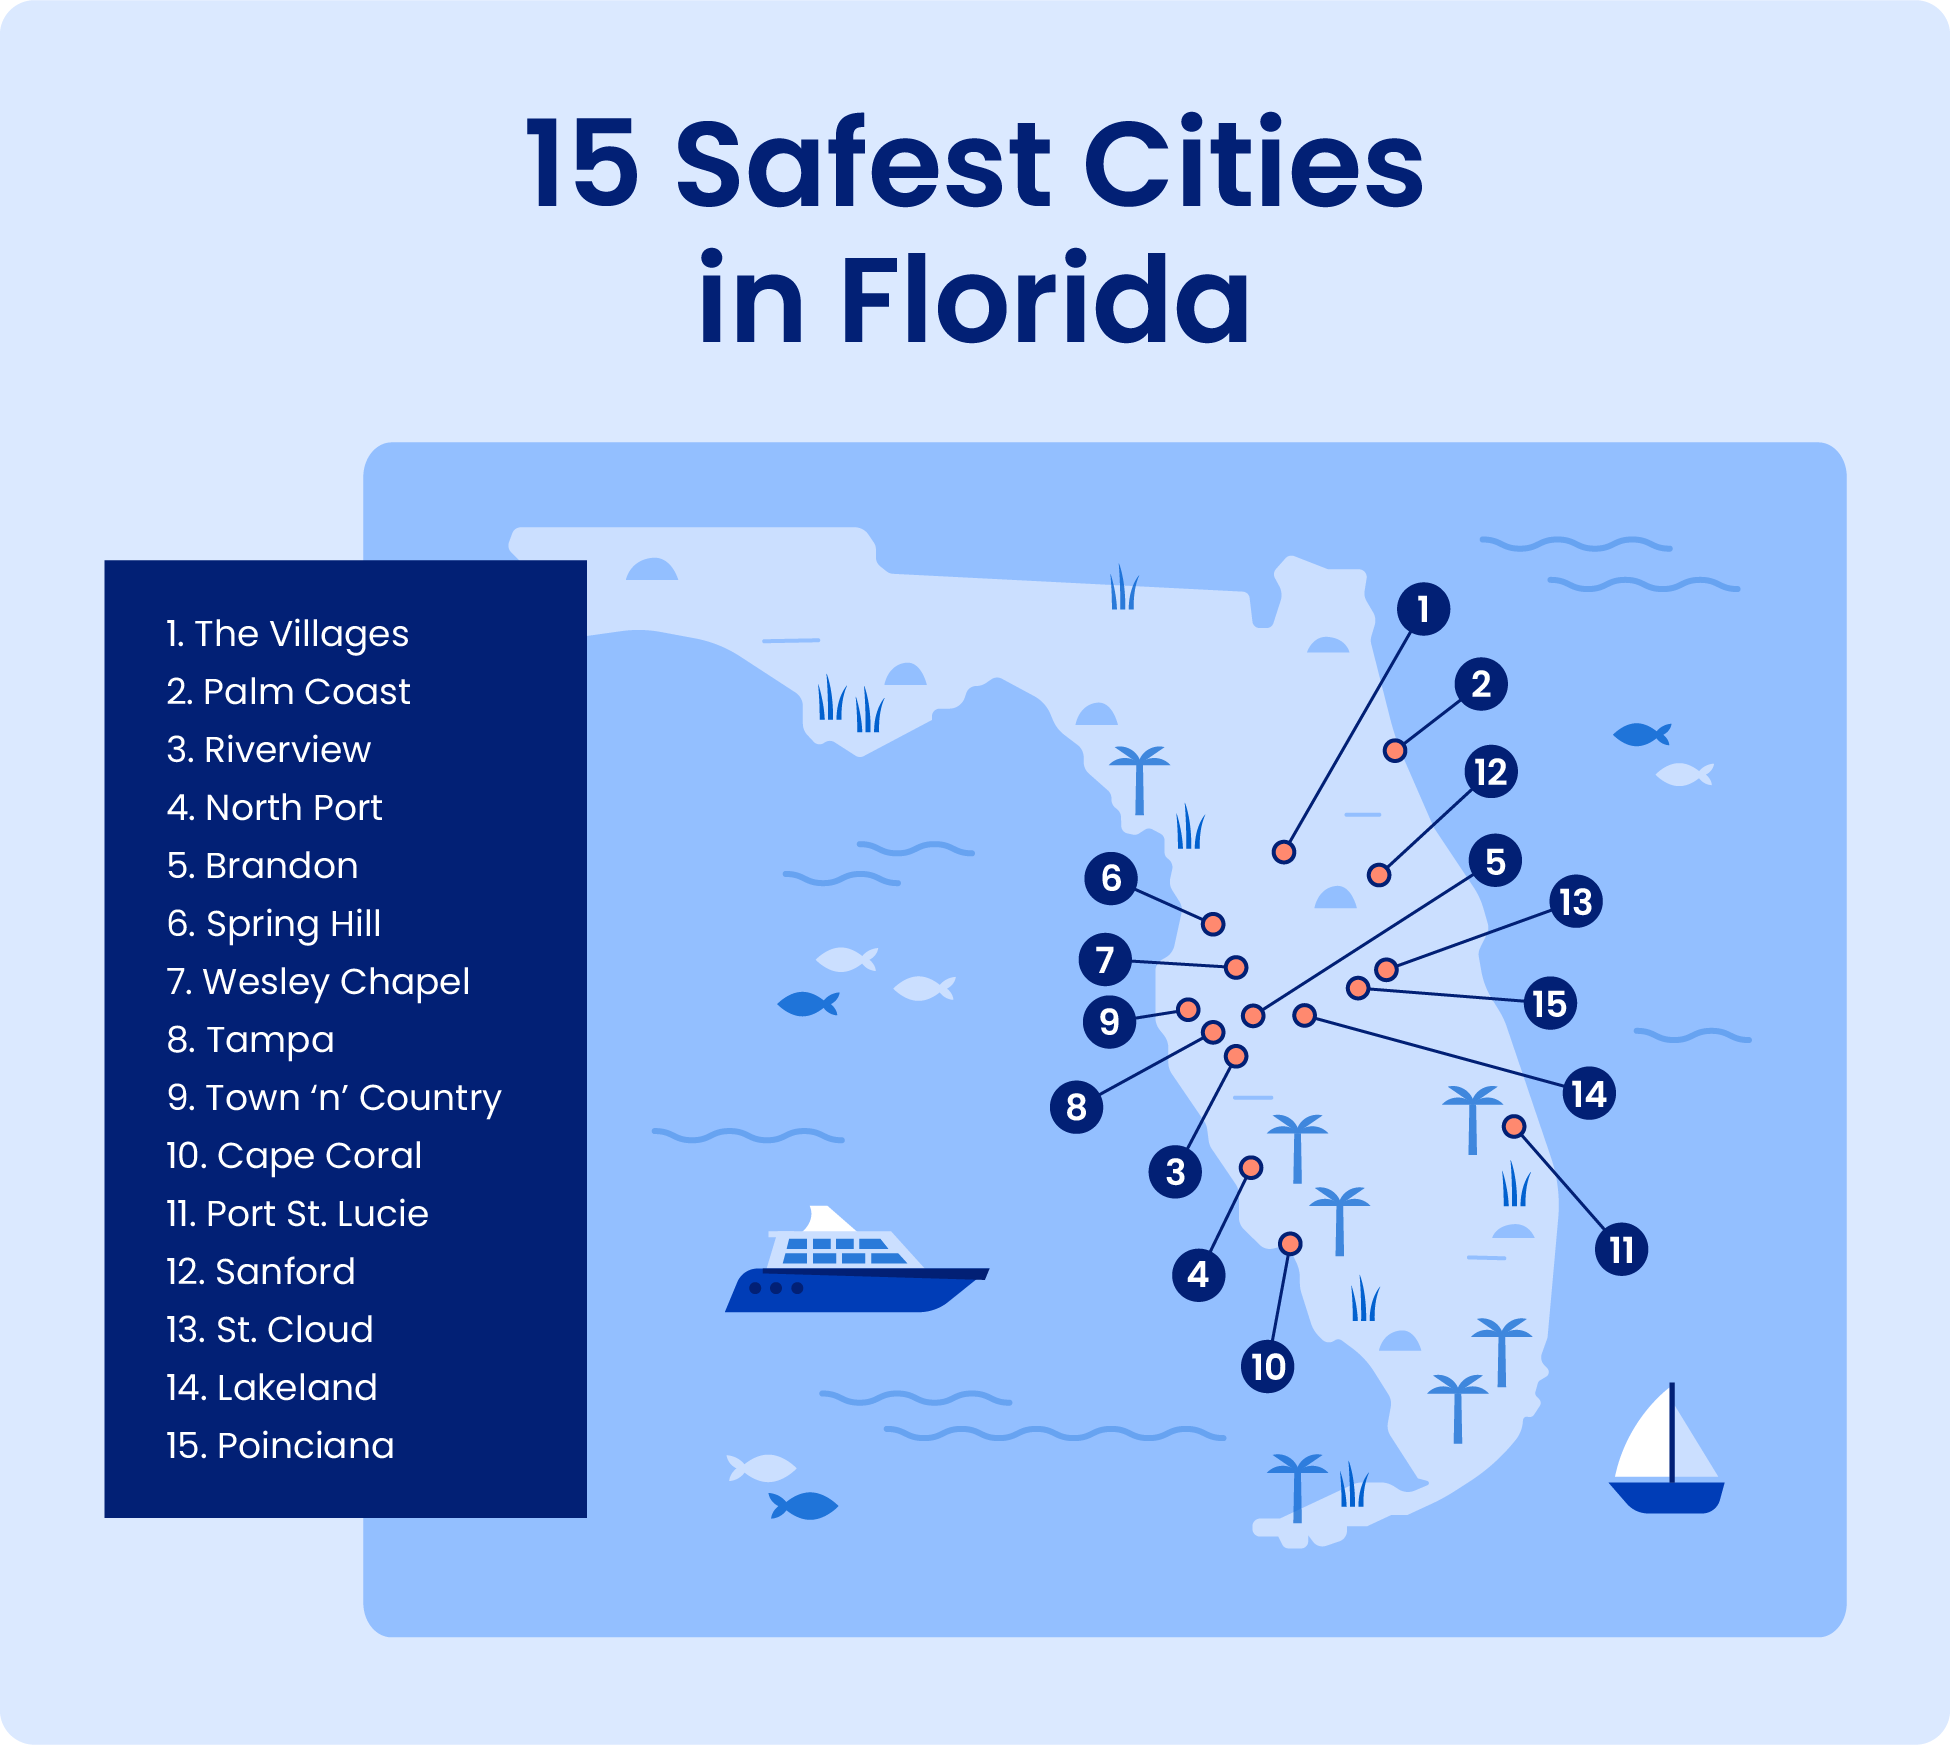 Map shows the 15 safest cities in Florida.